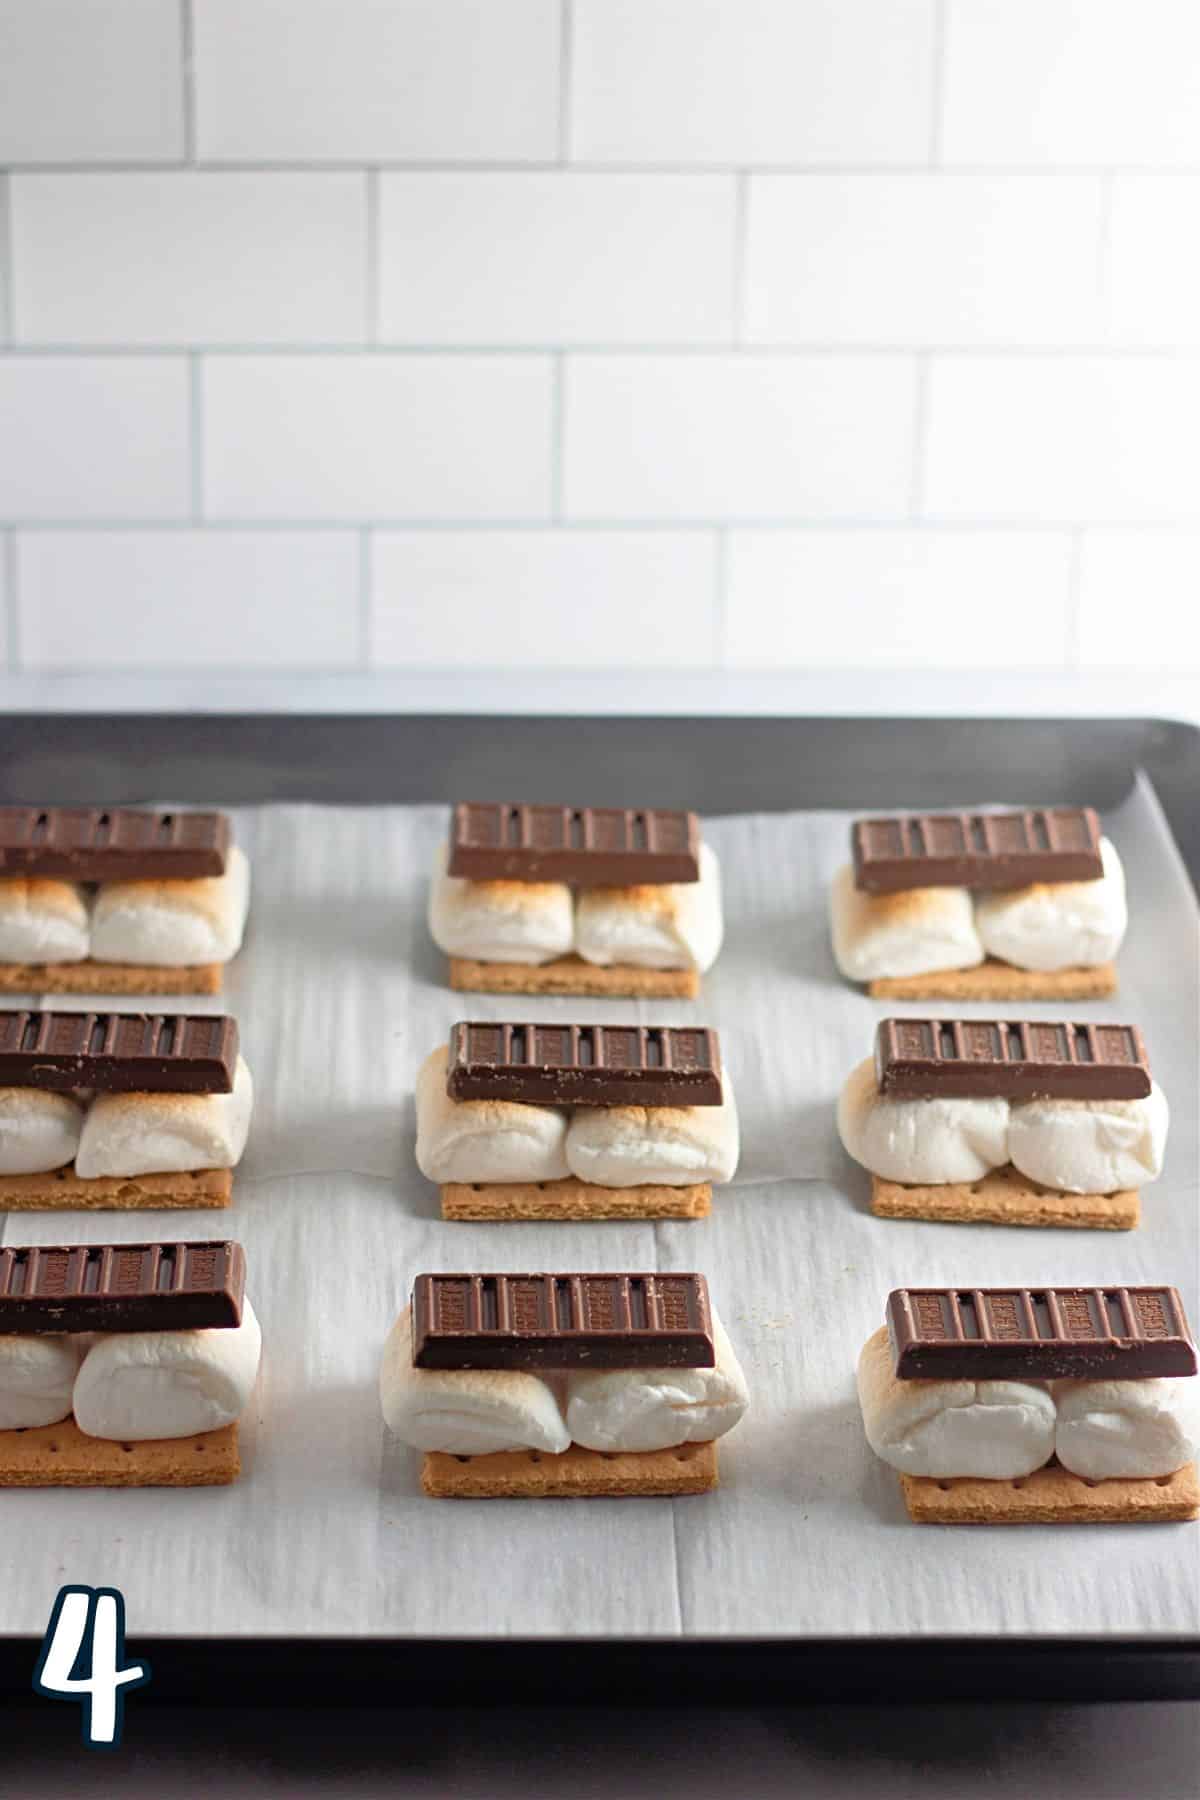 Chocolate bars on top of toasted marshmallows on a baking sheet. 